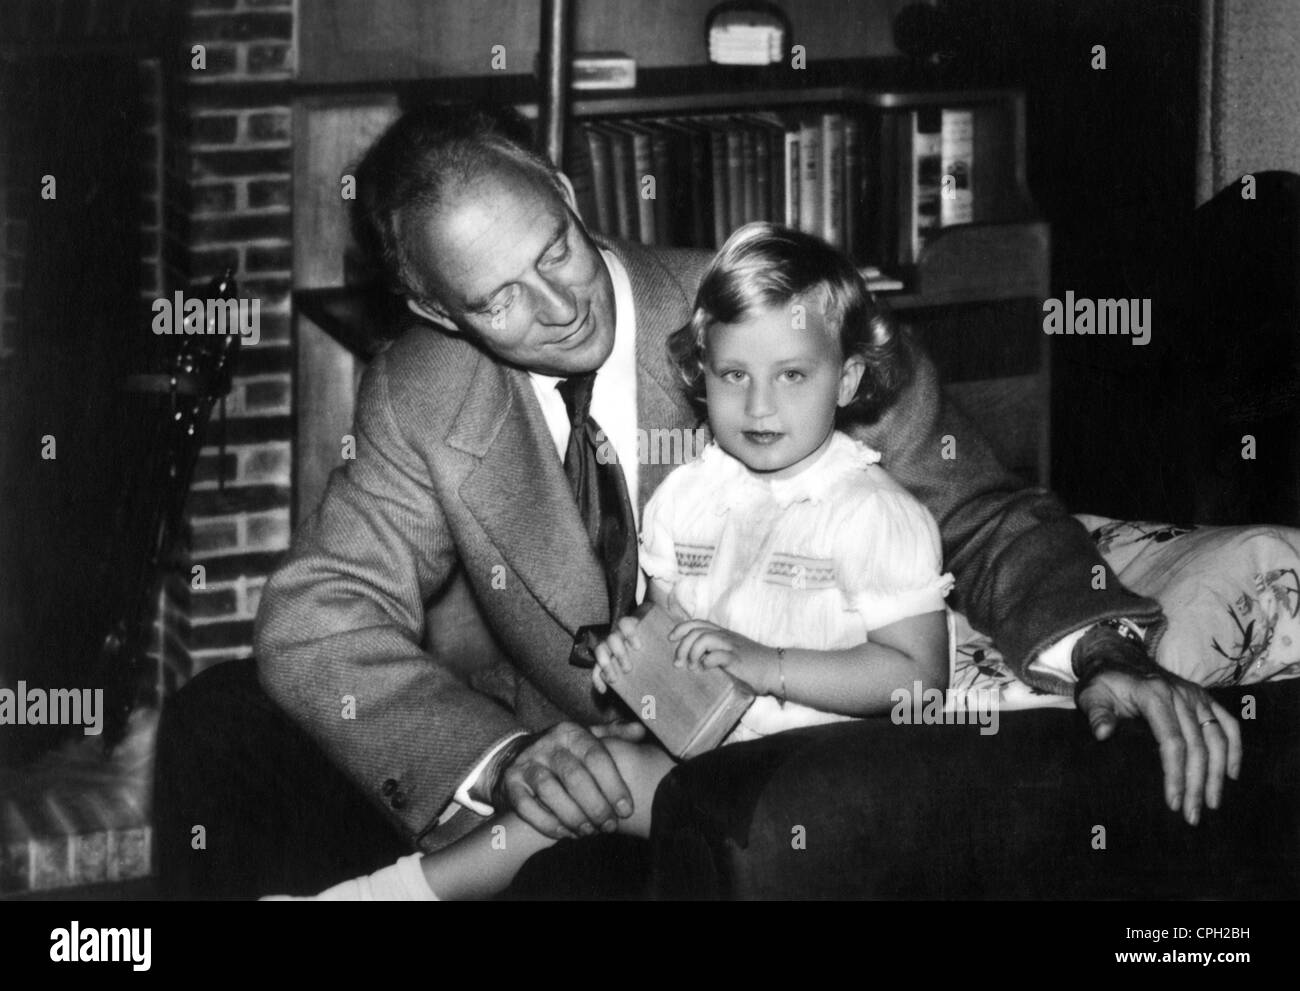 Leopold III, 3.11.1901 - 25.9.1983, King of the Belgians 23.2.1934 - 16.7.1951, with daugther Marie Christine, Laken Palace, Brussels, 1954, Stock Photo